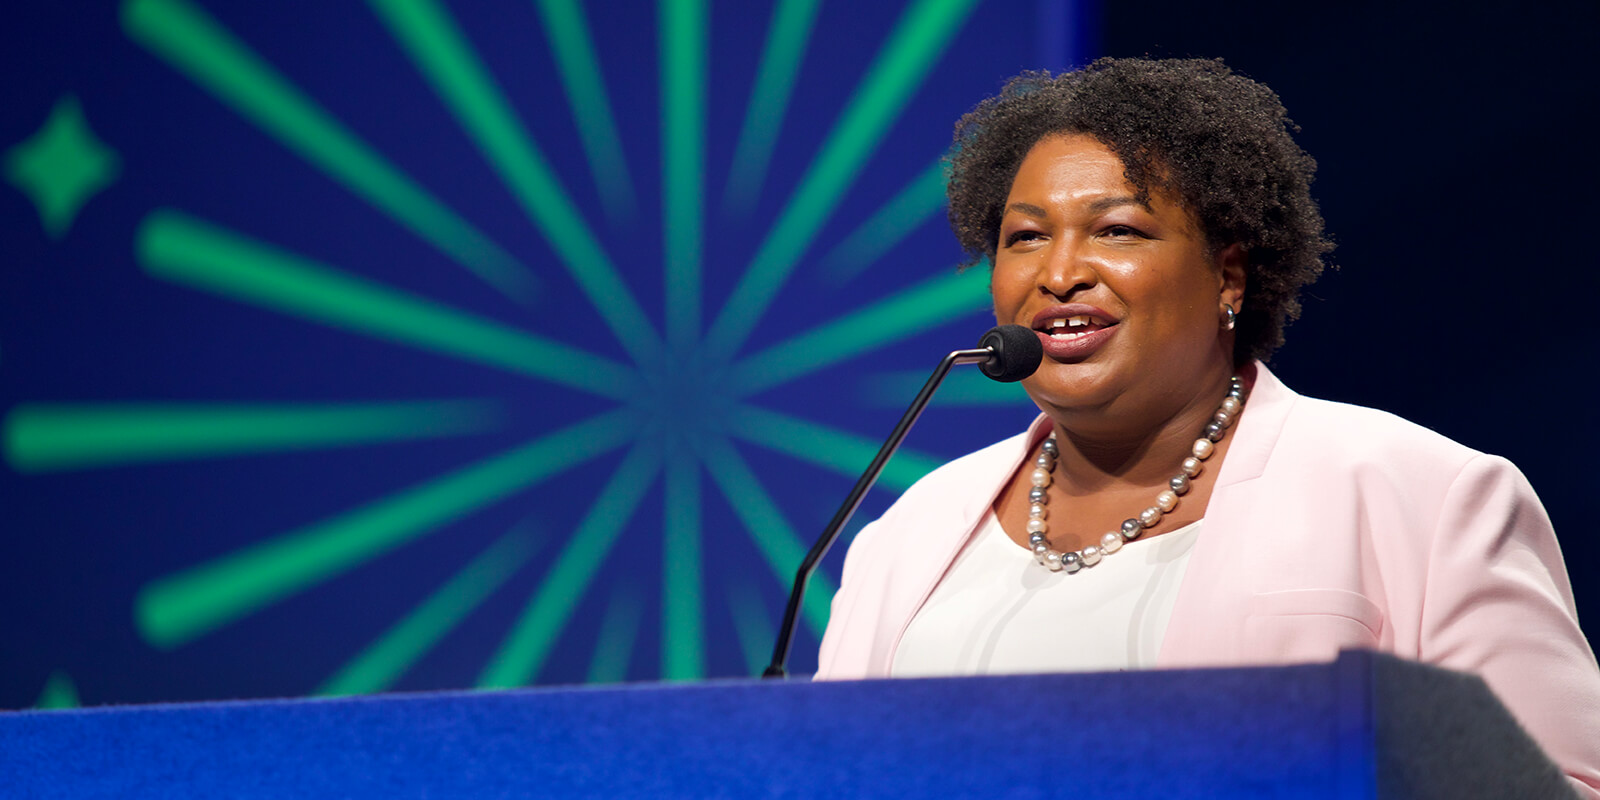 Stacey Abrams has an inspiring message for AFSCME Convention attendees